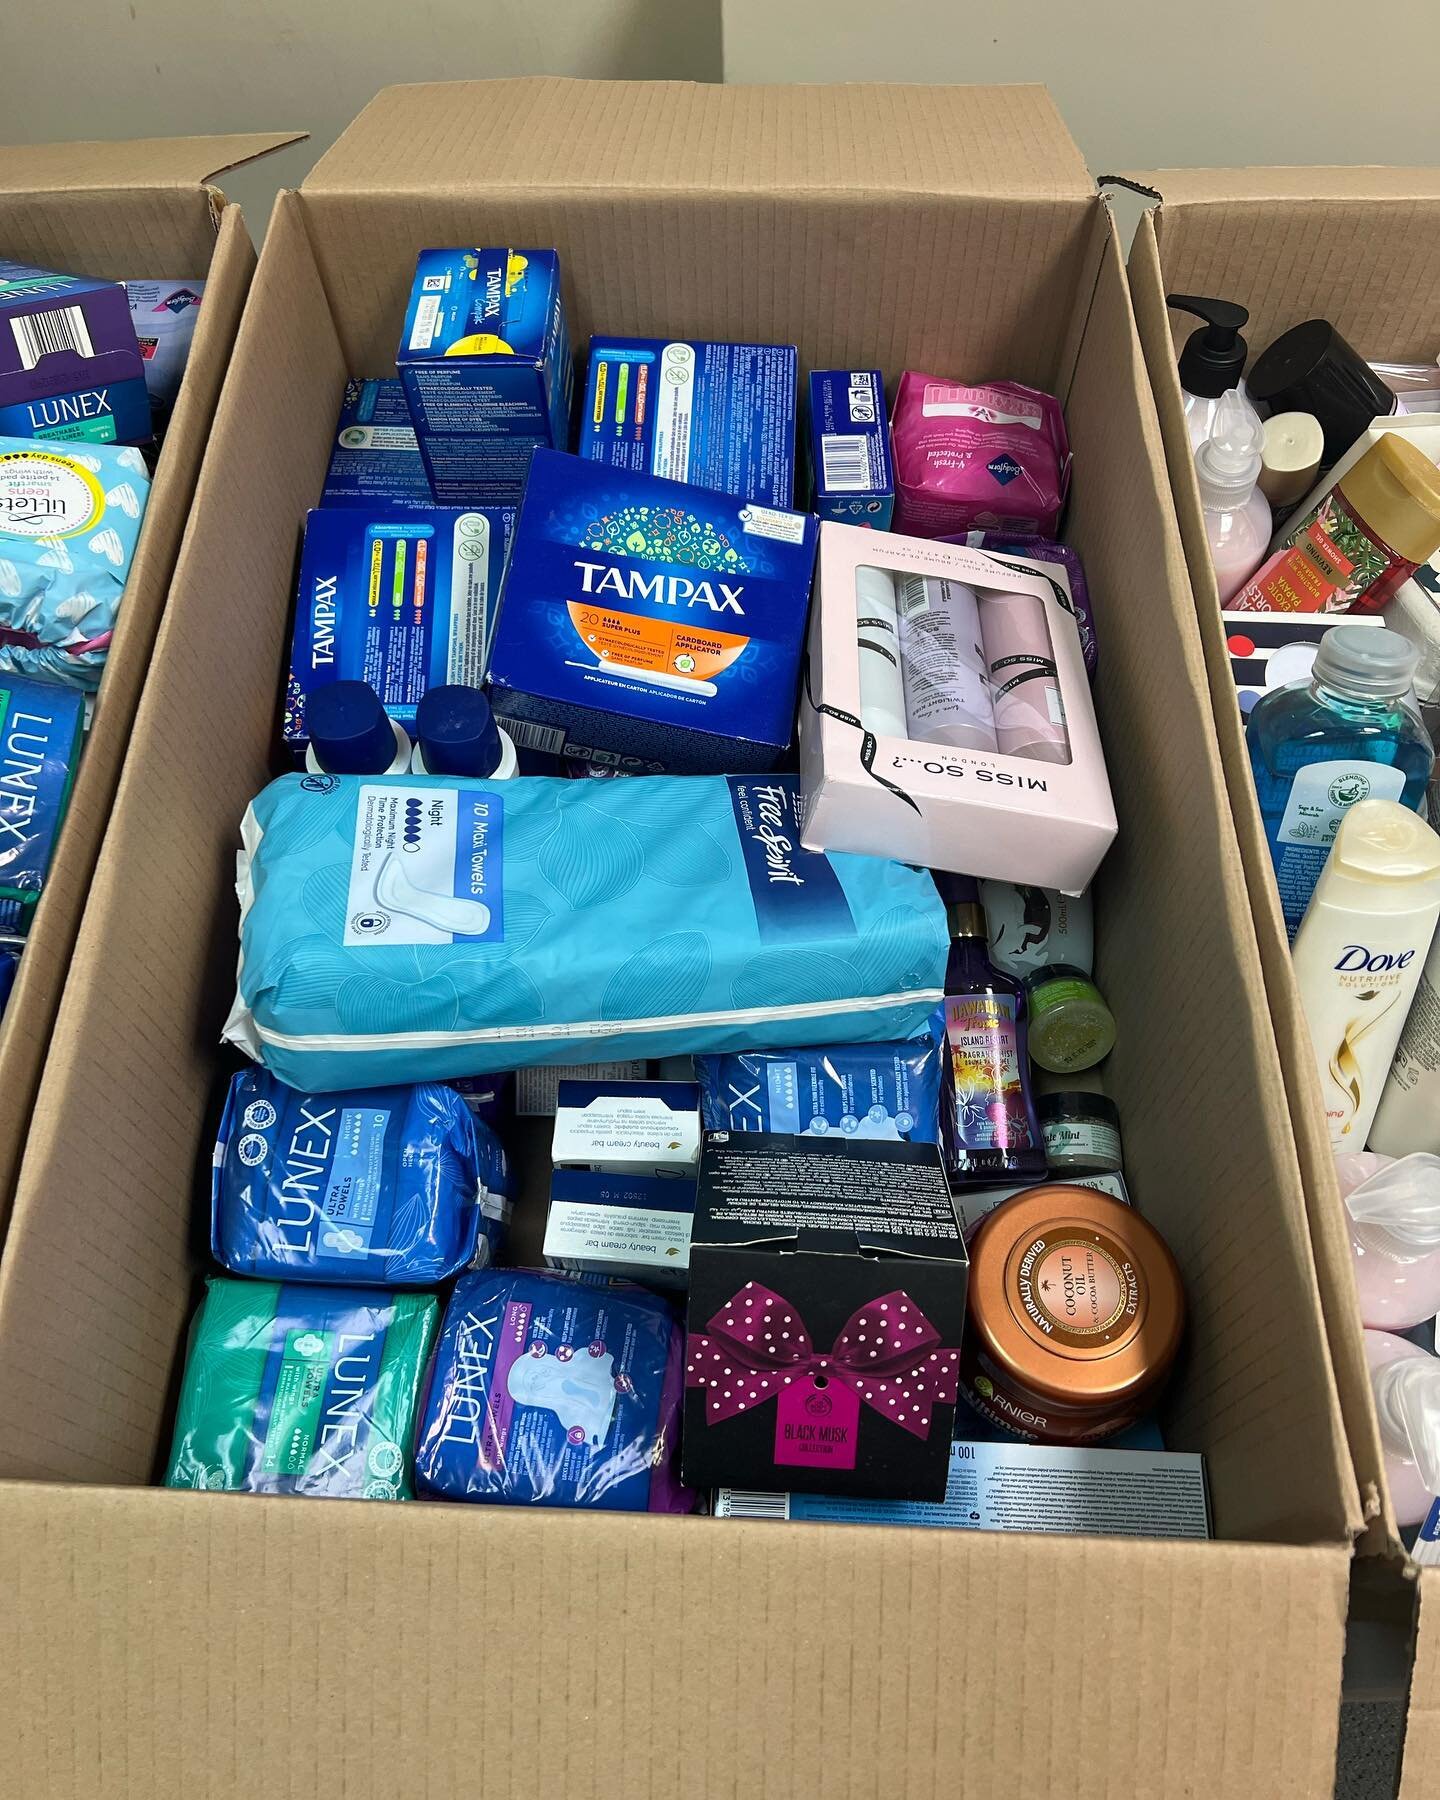 The Hygiene Bank was very lucky to receive these donated items from the customers of Boots. Thank you to the team for this amazing donation @bootsuk @lakeside @thehygienebank #hygieneisarightnotaluxury